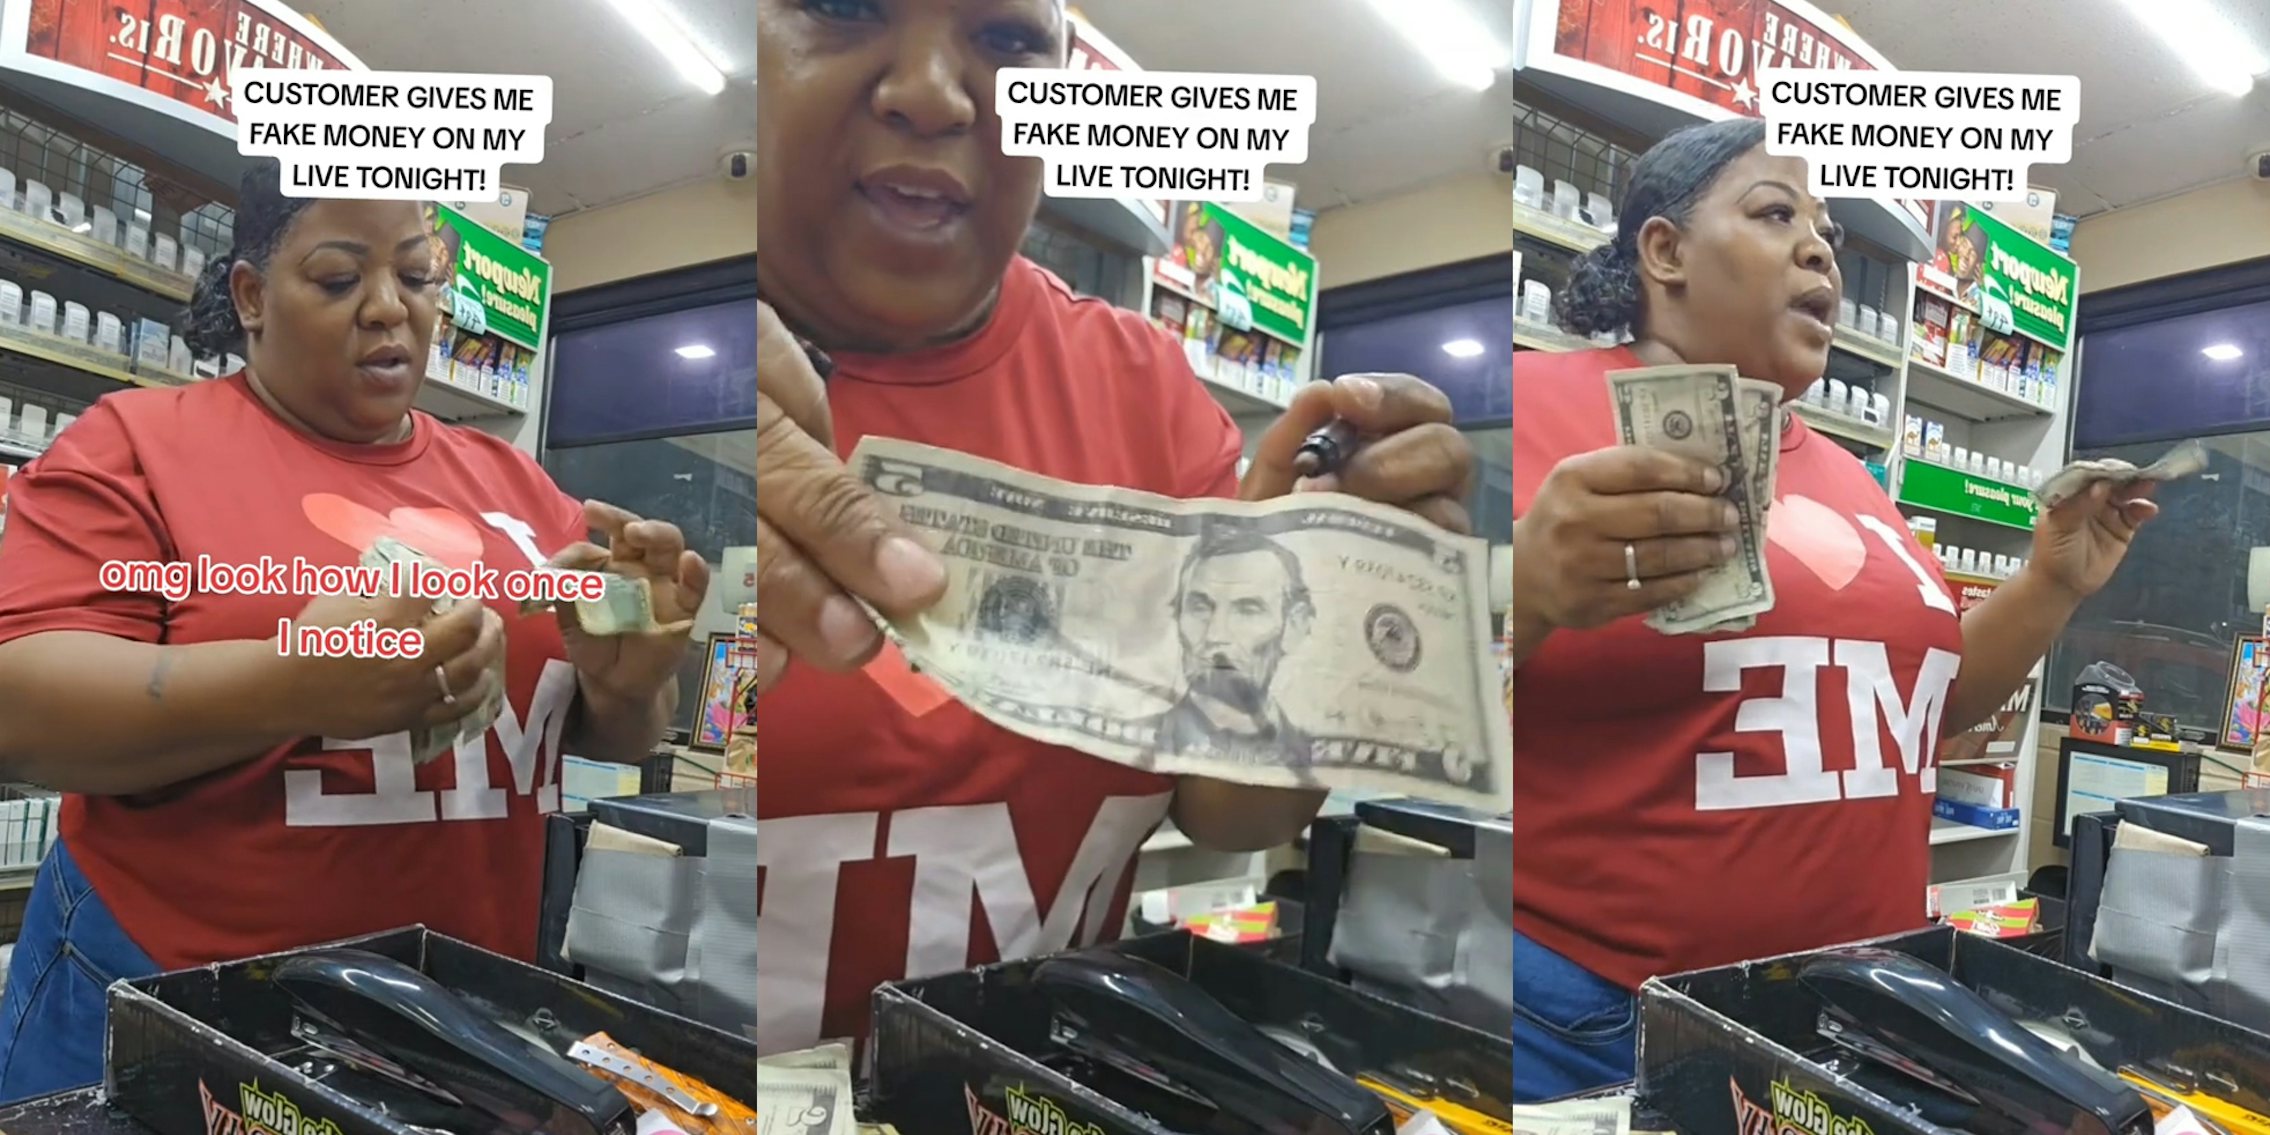 gas station worker holding money while speaking at cash register with caption 'CUSTOMER GIVES ME FAKE MONEY ON MY LIVE TONIGHT!' 'omg look how I look once I notice' (l) gas station worker holding money while speaking at cash register with caption 'CUSTOMER GIVES ME FAKE MONEY ON MY LIVE TONIGHT!' (c) gas station worker holding money while speaking at cash register with caption 'CUSTOMER GIVES ME FAKE MONEY ON MY LIVE TONIGHT!' ' (r)